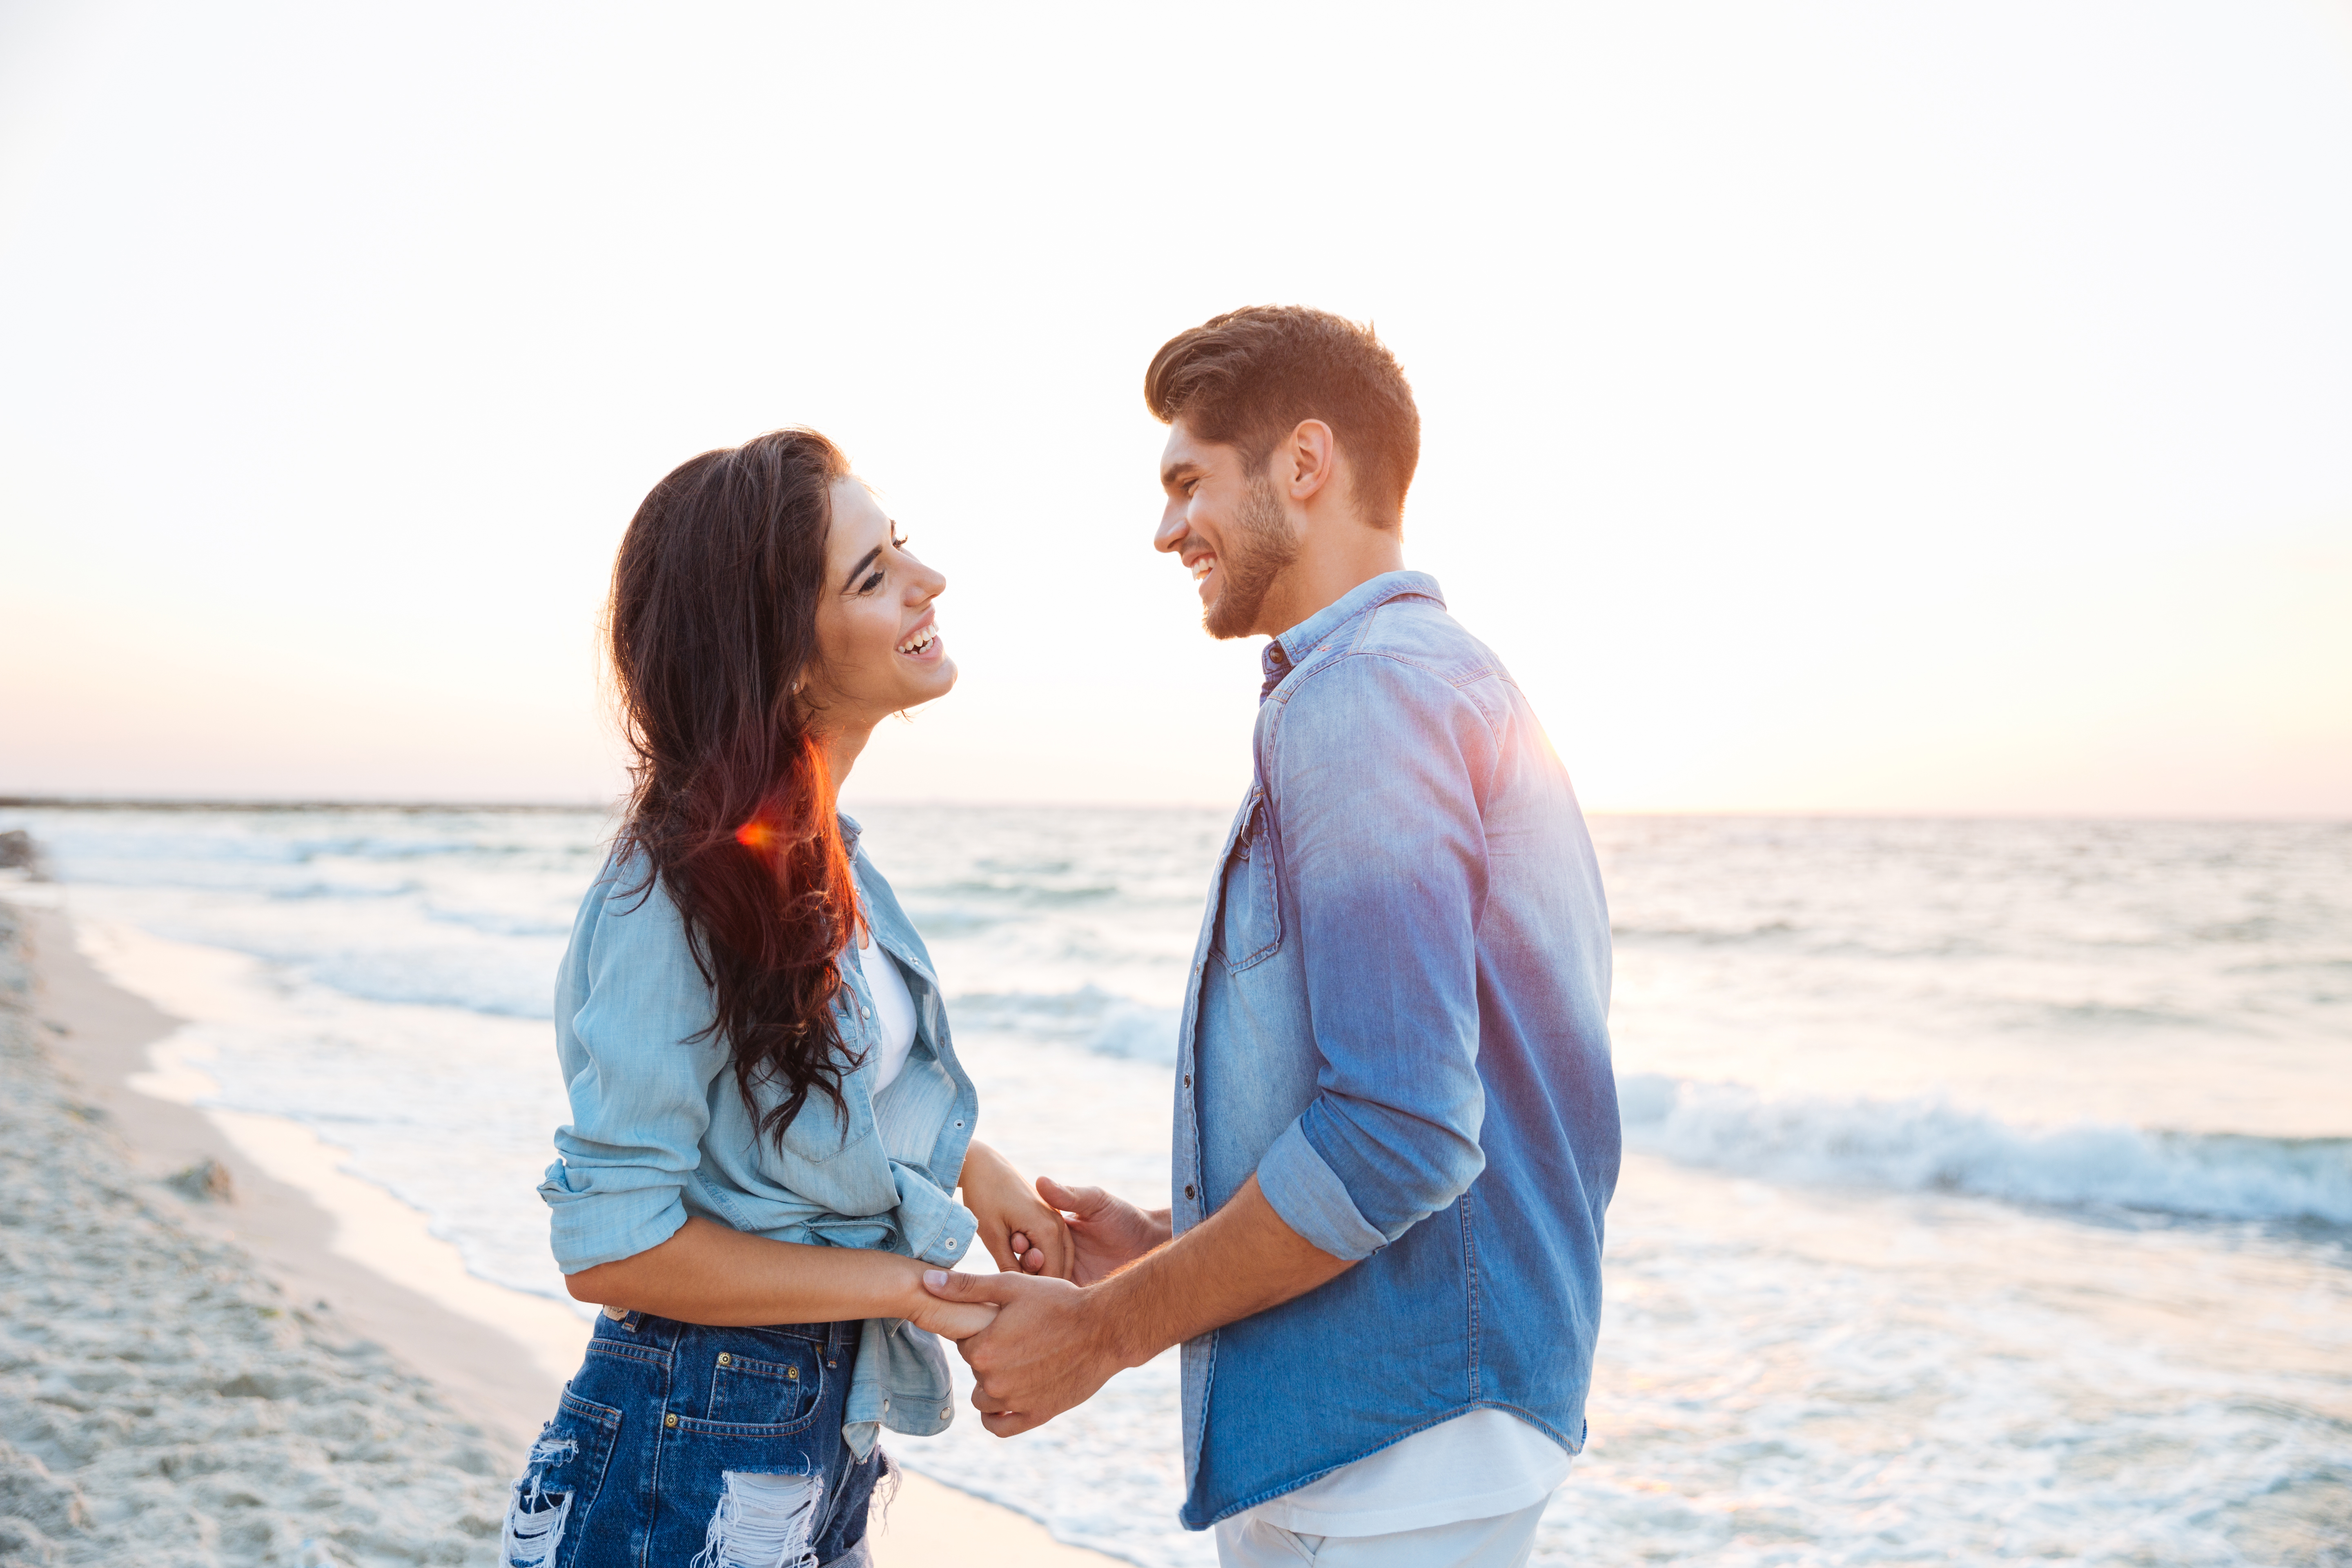 A happy couple walking and holding hands at the beach | Source: Shutterstock